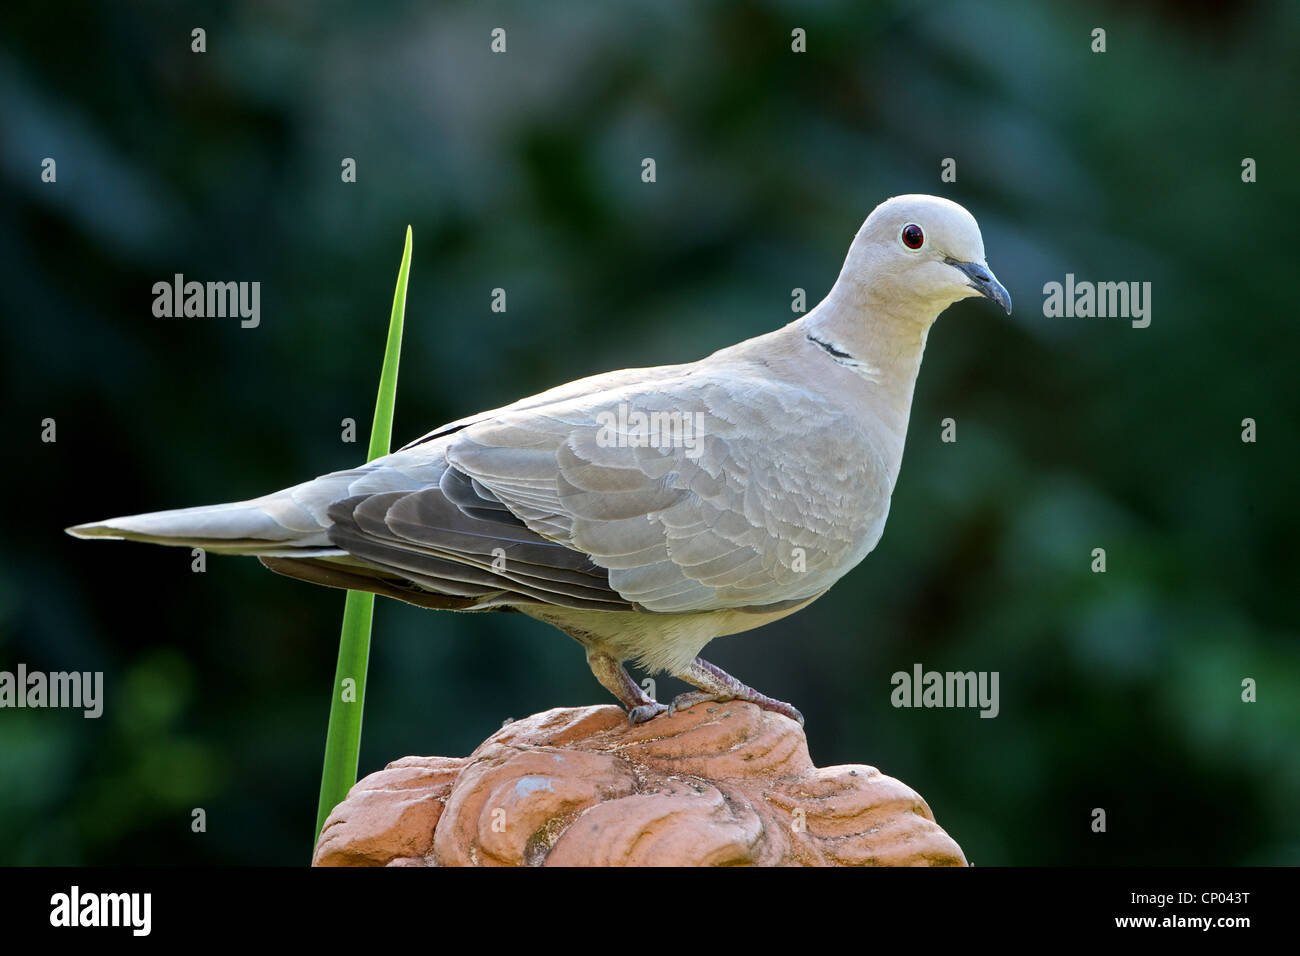 collared dove (Streptopelia decaocto), sitting on a garden sculpture, Germany Stock Photo